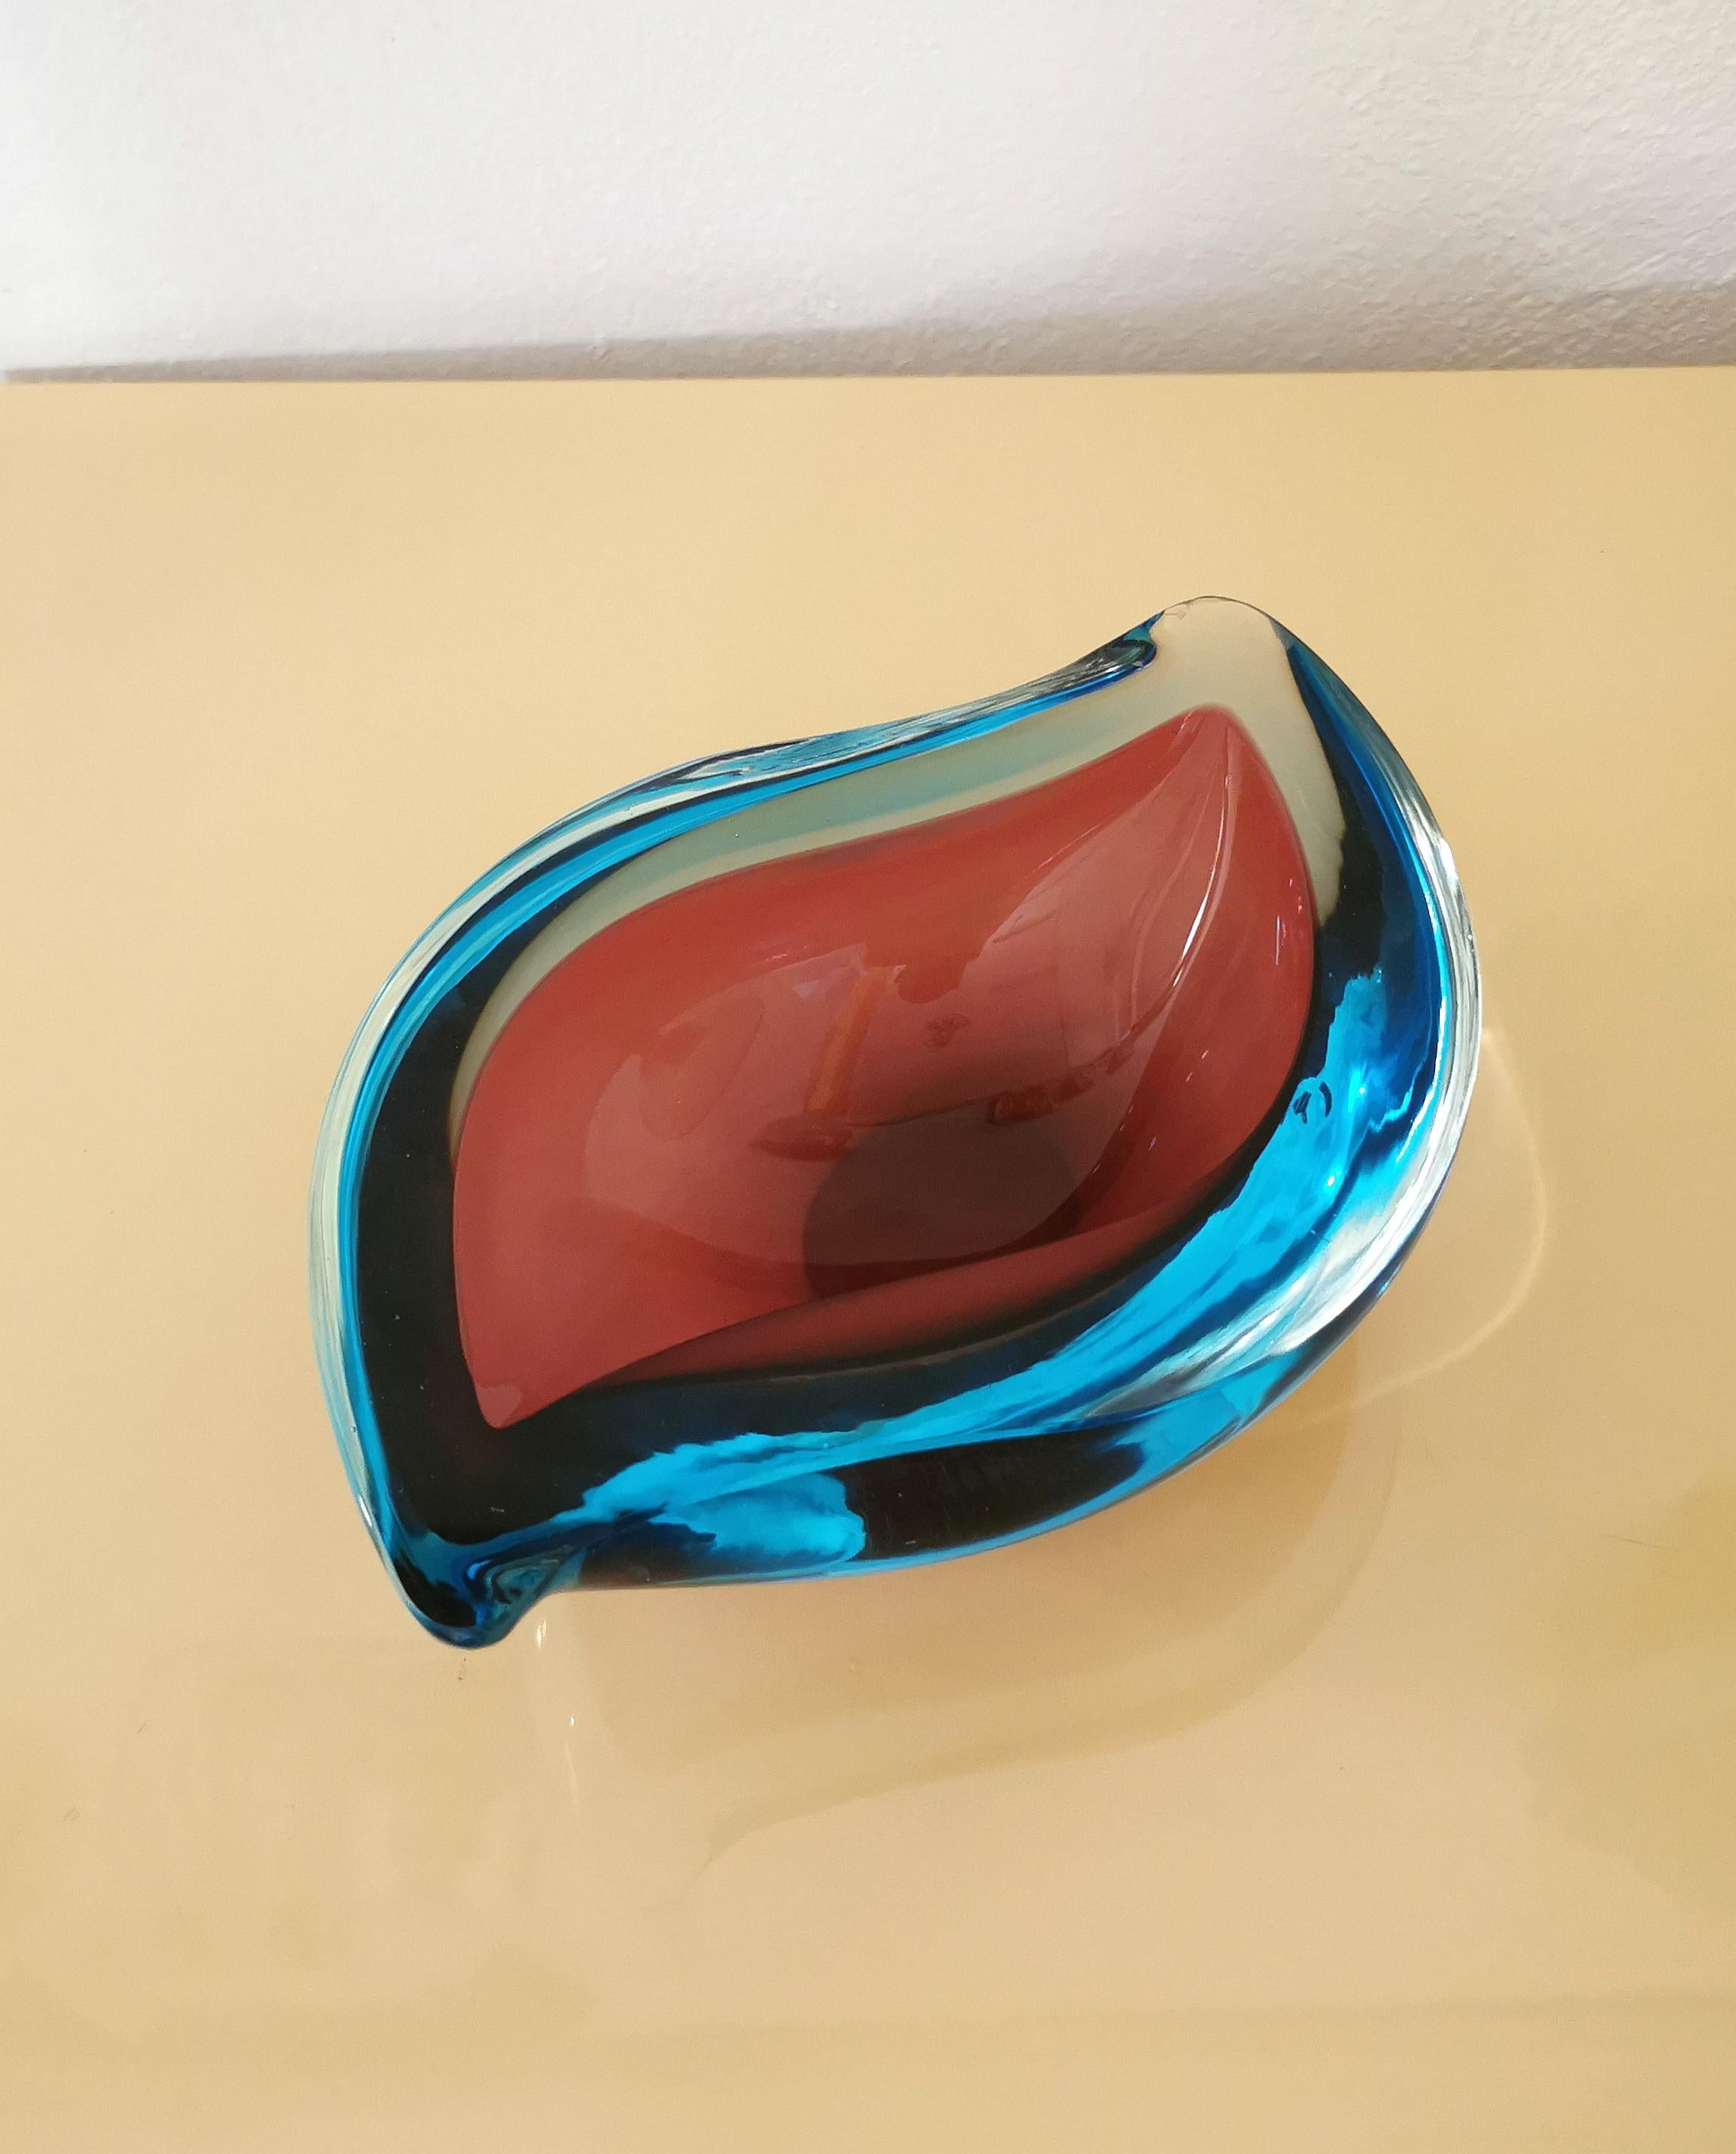 Vide-poche/ashtray with the particular shape of a drop attributable to the Italian designer Flavio Poli, produced in the 70s.
The vide-poche was made of Murano glass, in shades of bordeaux and light blue with the famous 